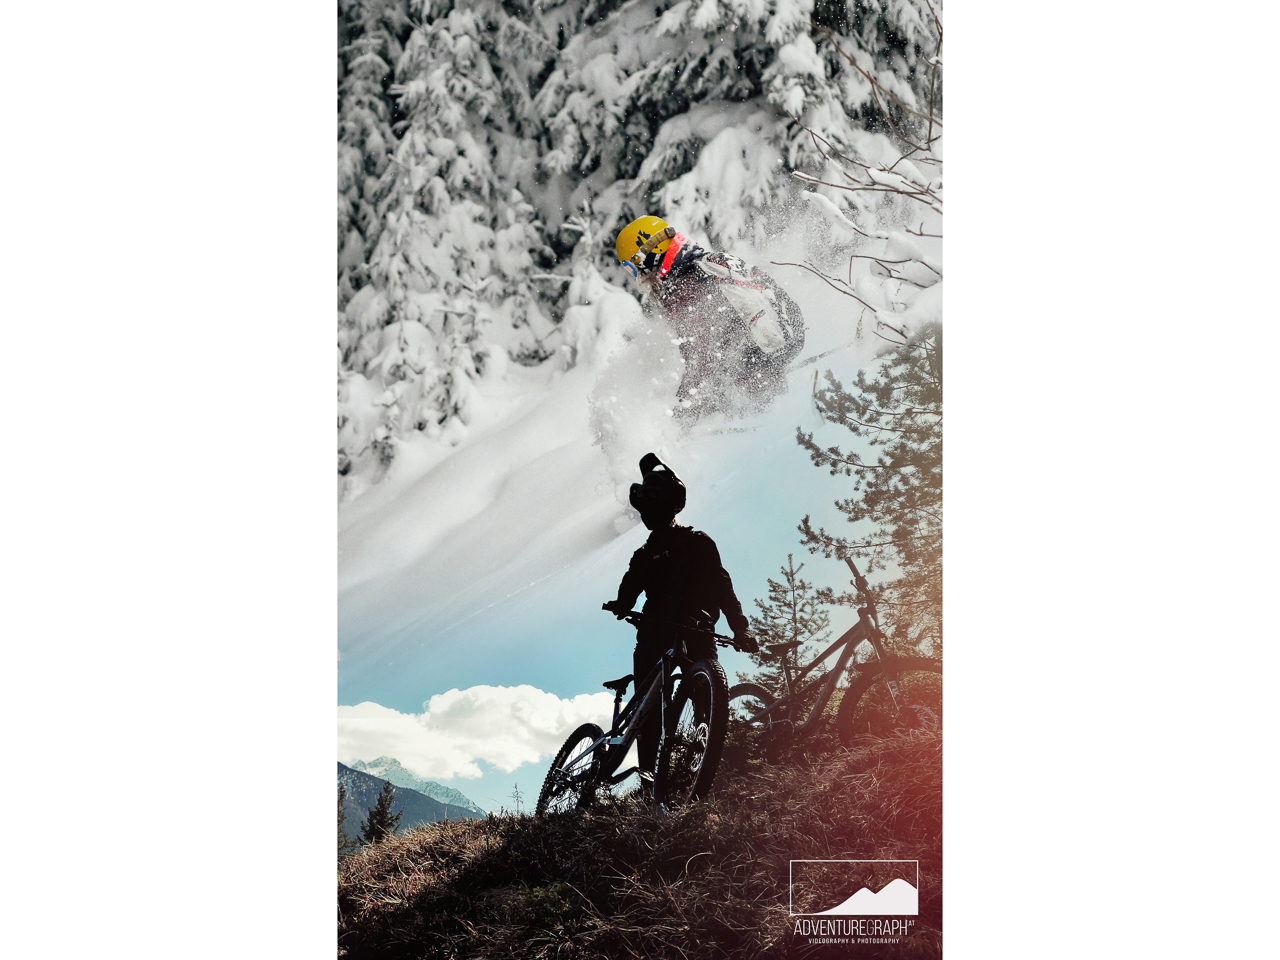 Collage of winter and summer outdoor skiing (freeride) and mountainbiking.